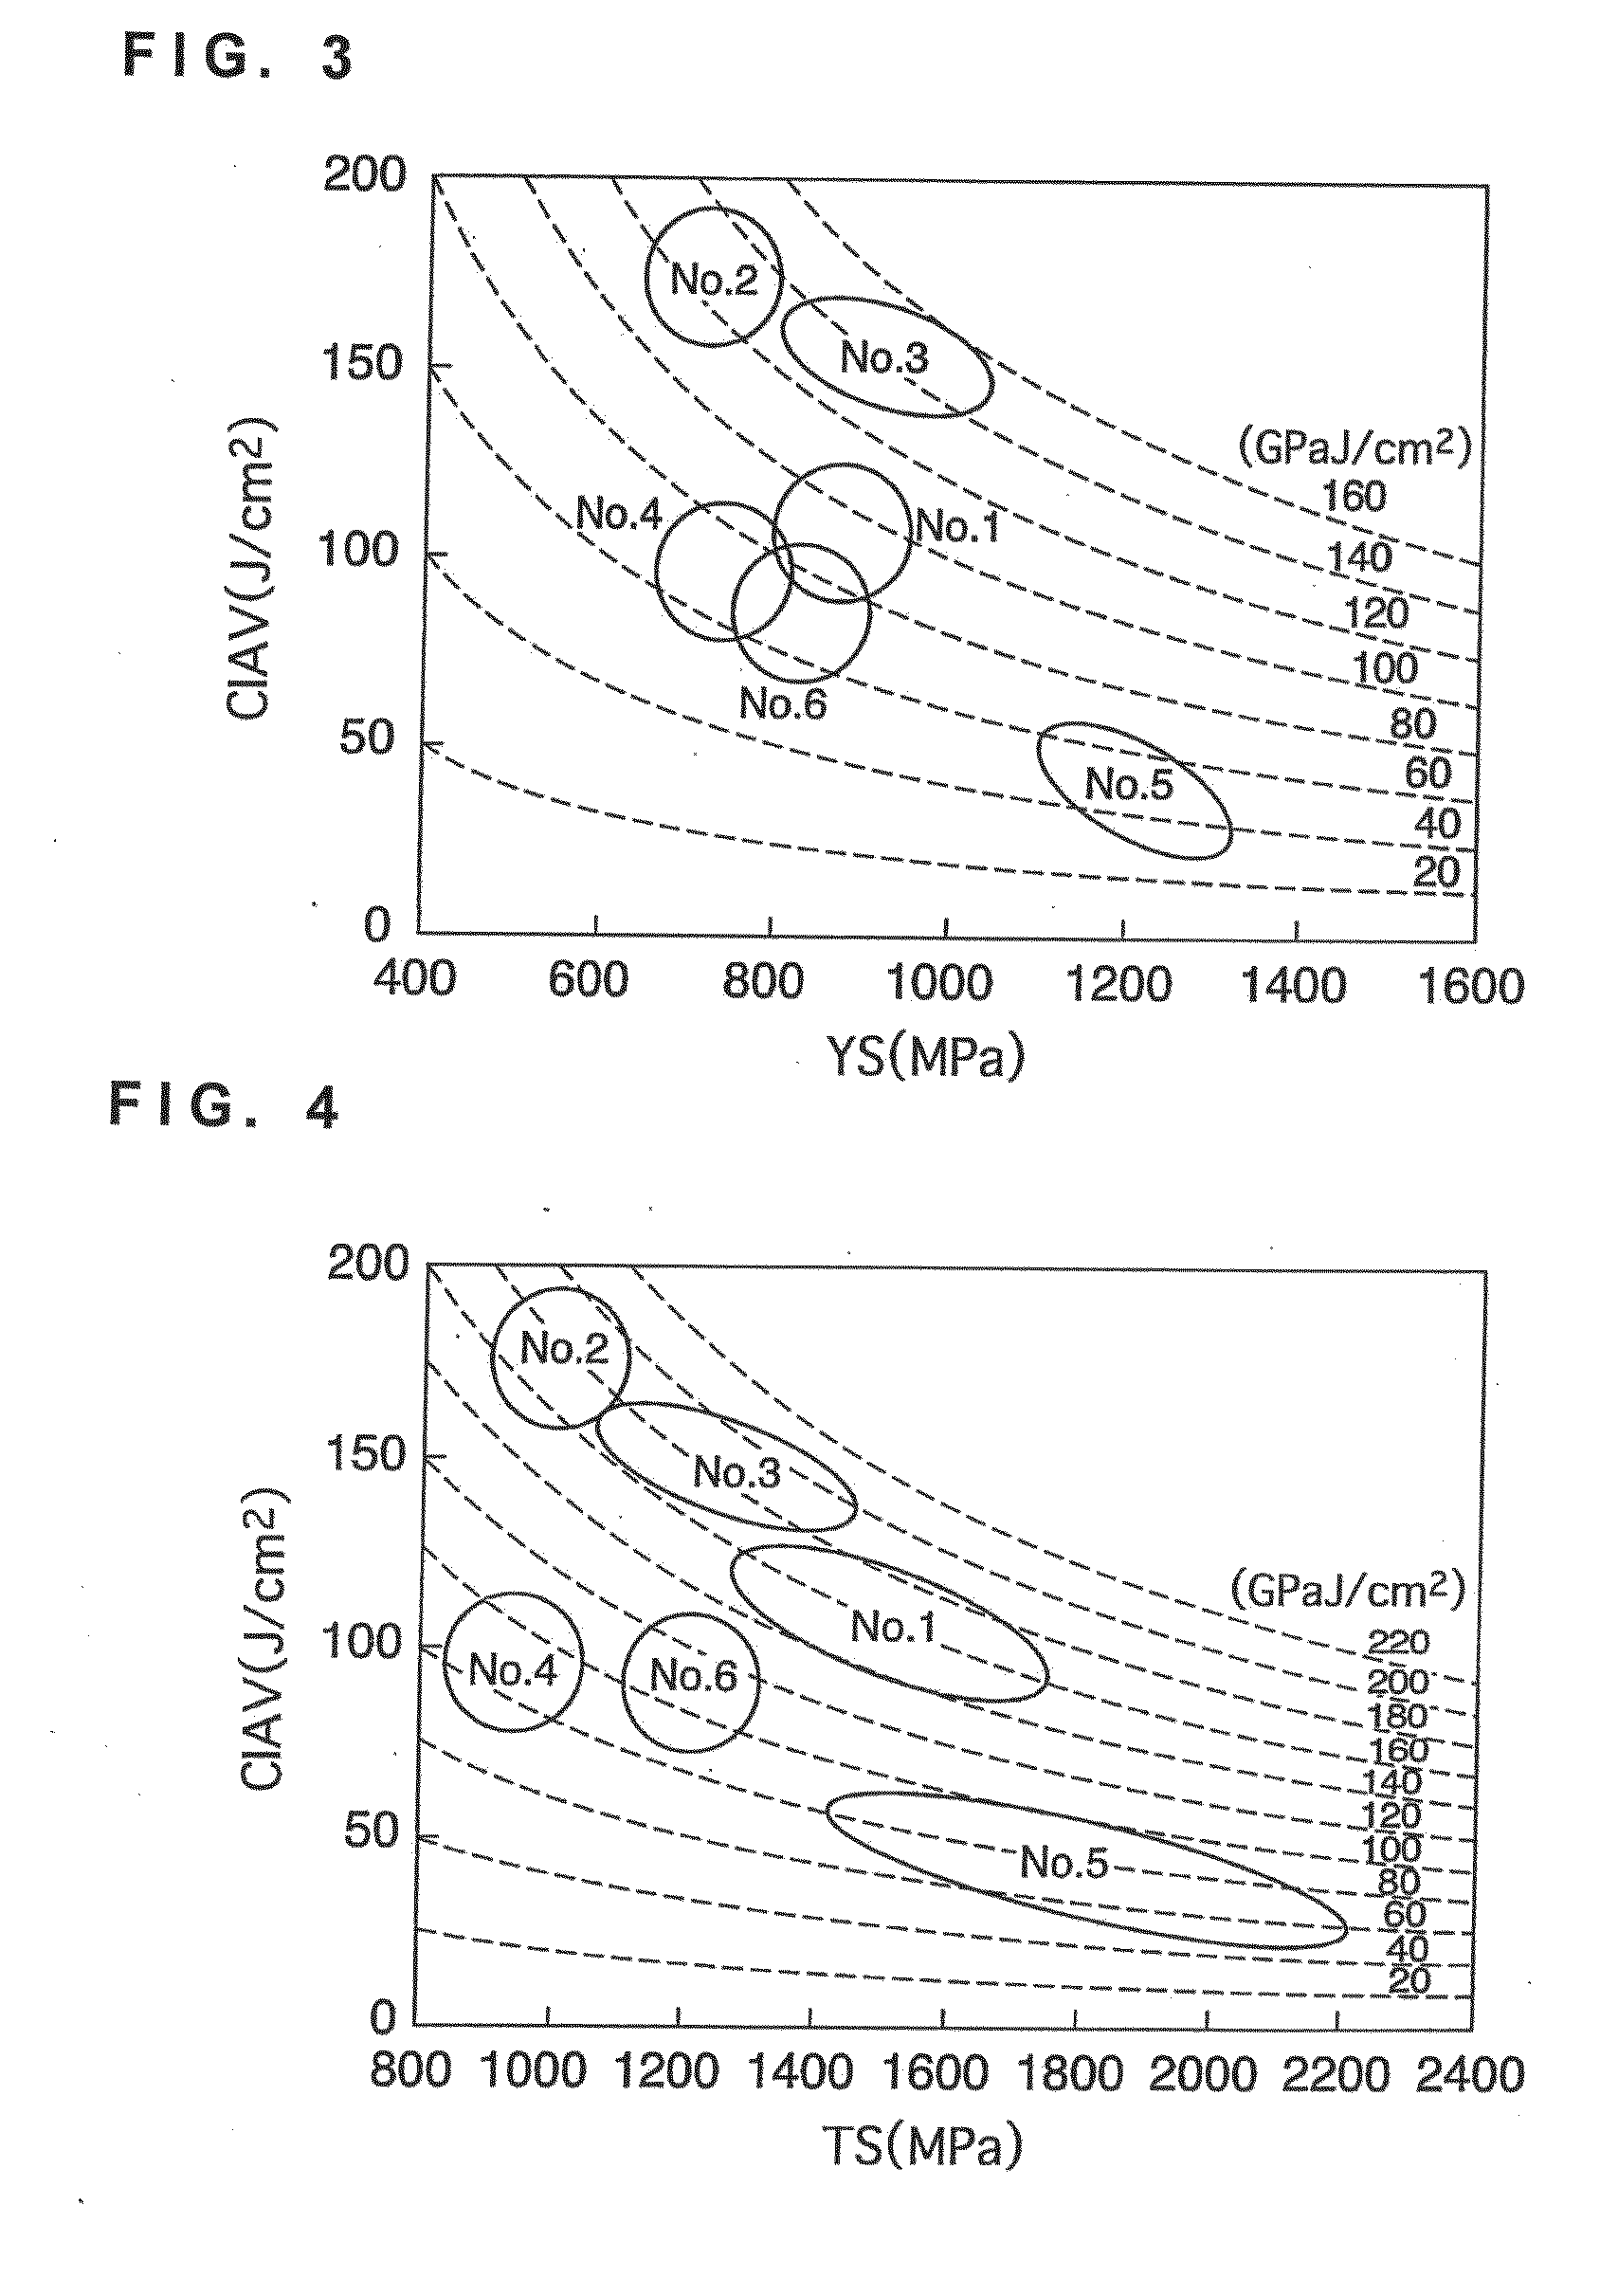 High-Strength Steel Machined Product and Method for Manufacturing the Same, and Method for Manufacturing Diesel Engine Fuel Injection Pipe and Common Rail